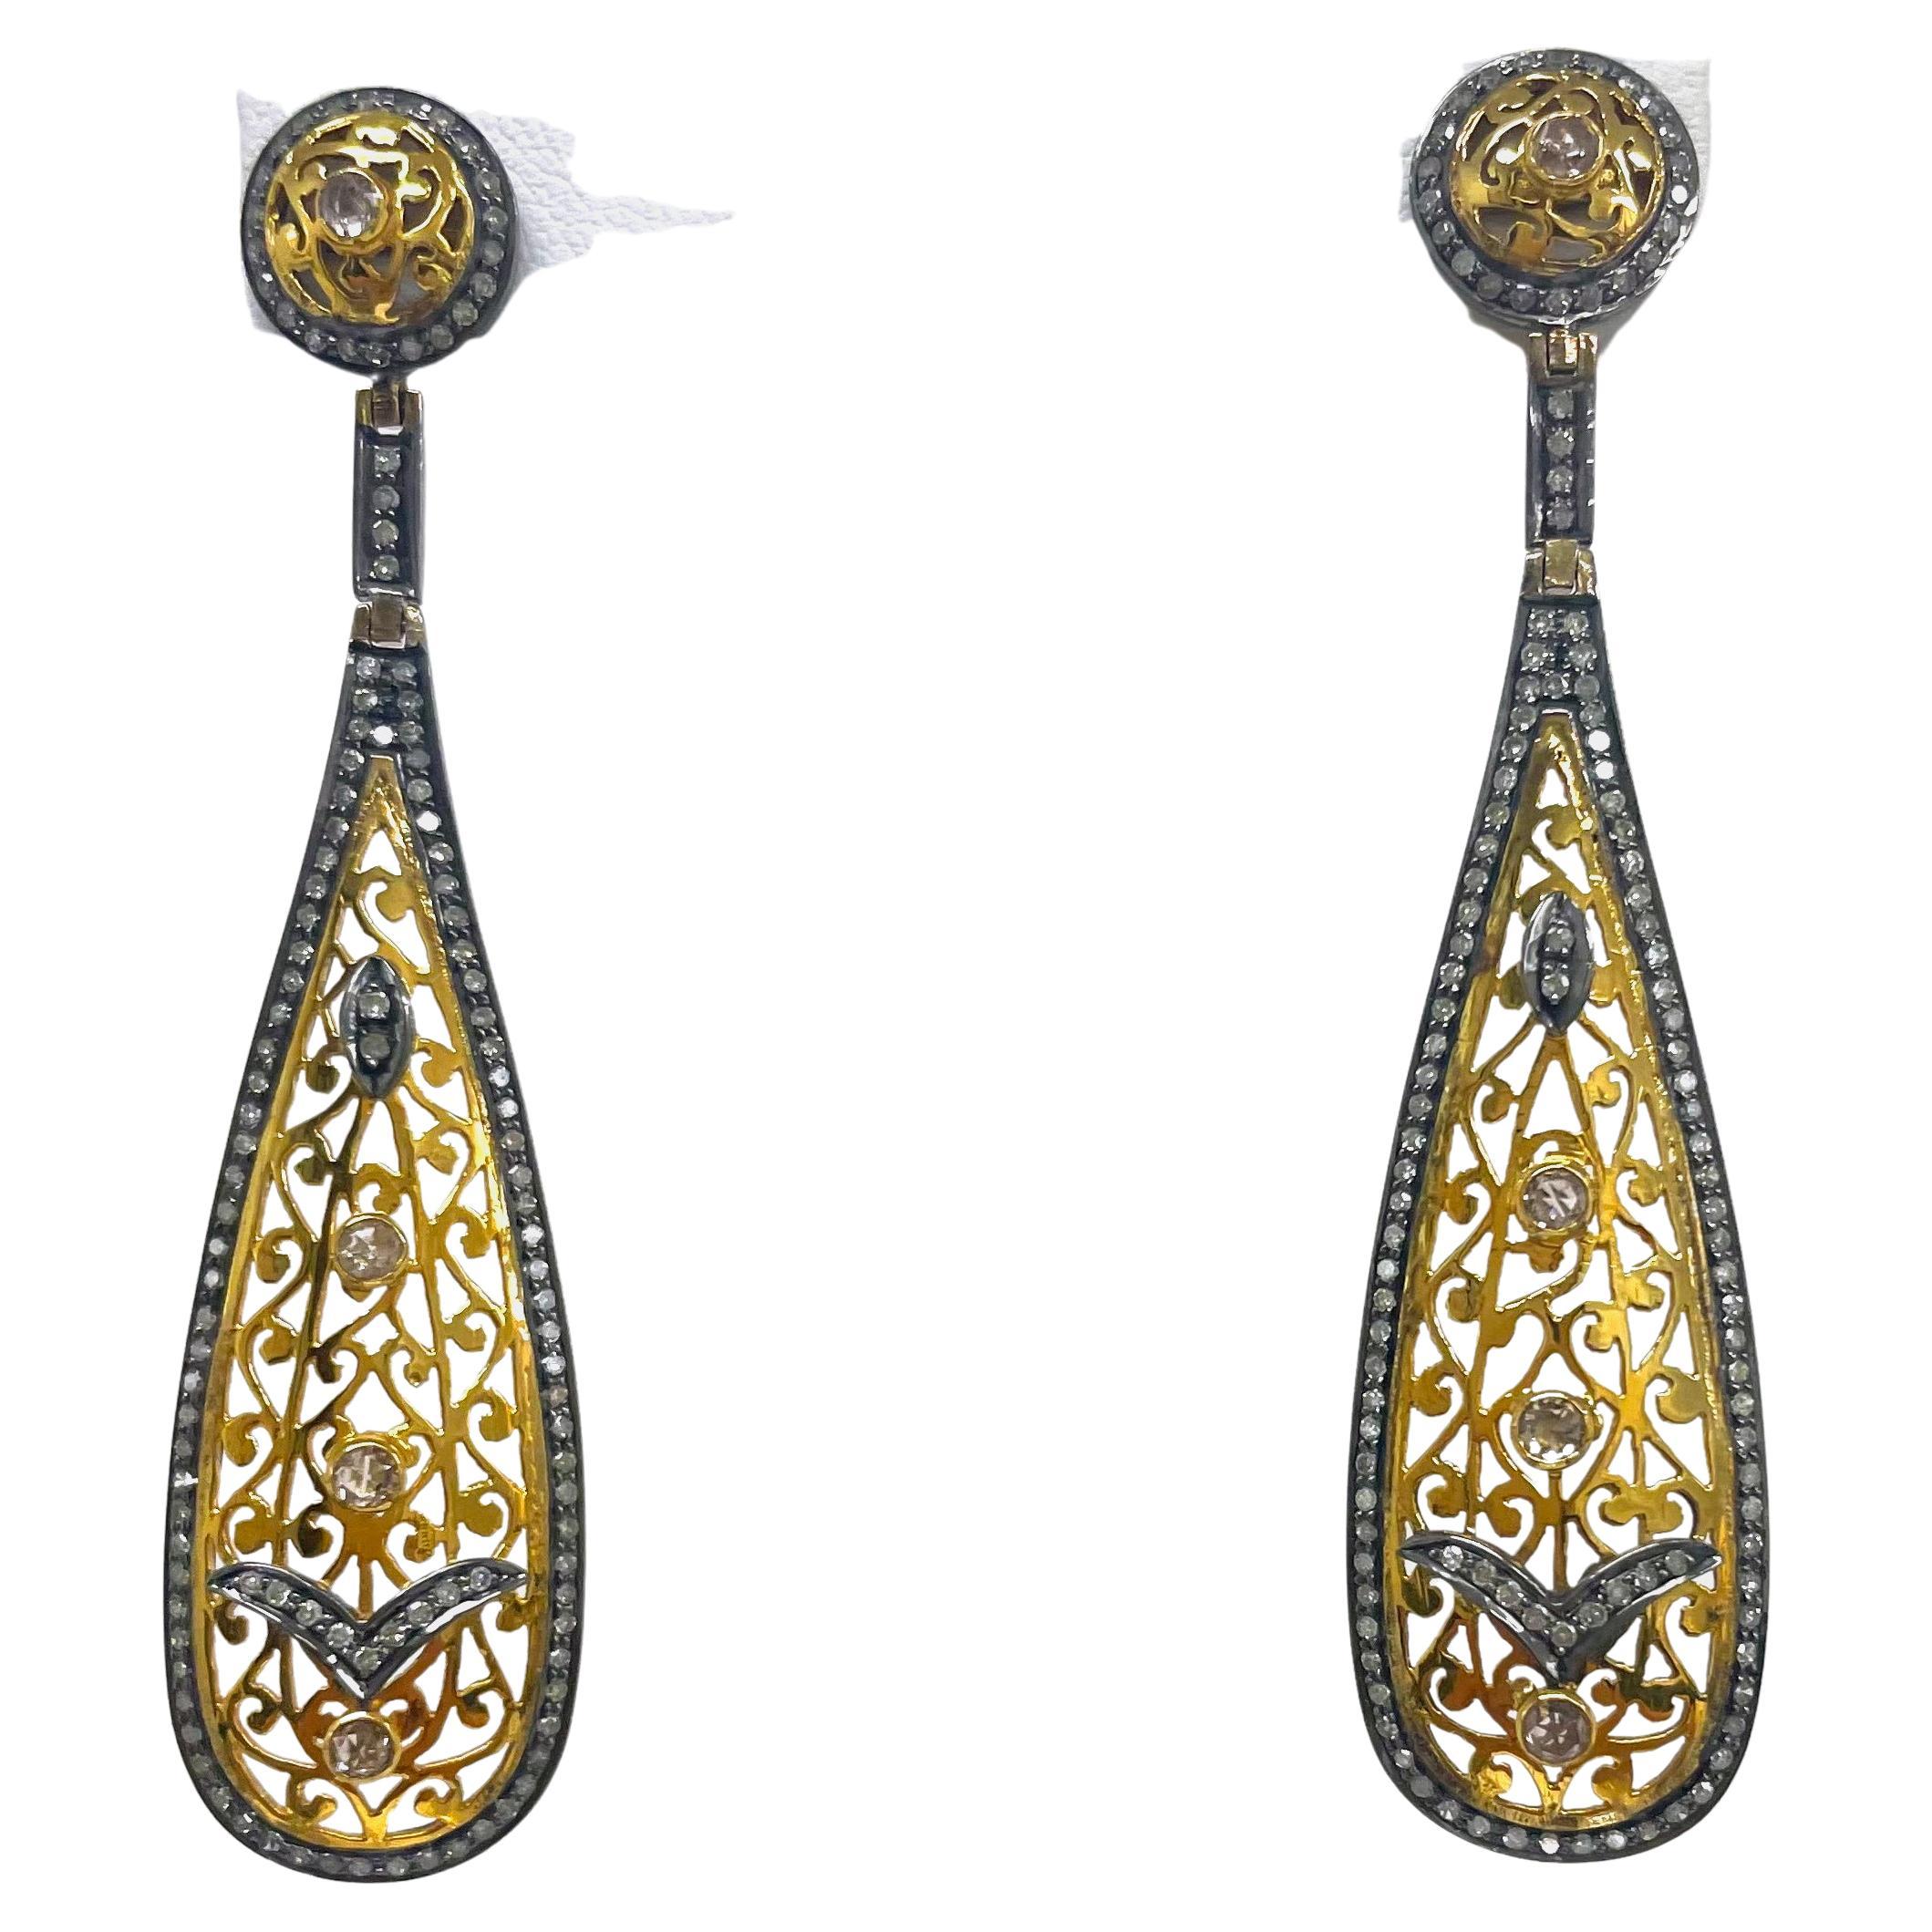 Description
Beautiful and feminine Art Deco style earrings intricately detailed with 14k yellow gold filigree and embellished with rose cut champagne diamonds. The contrast of yellow gold with medium-gray rhodium sterling silver set pave diamonds